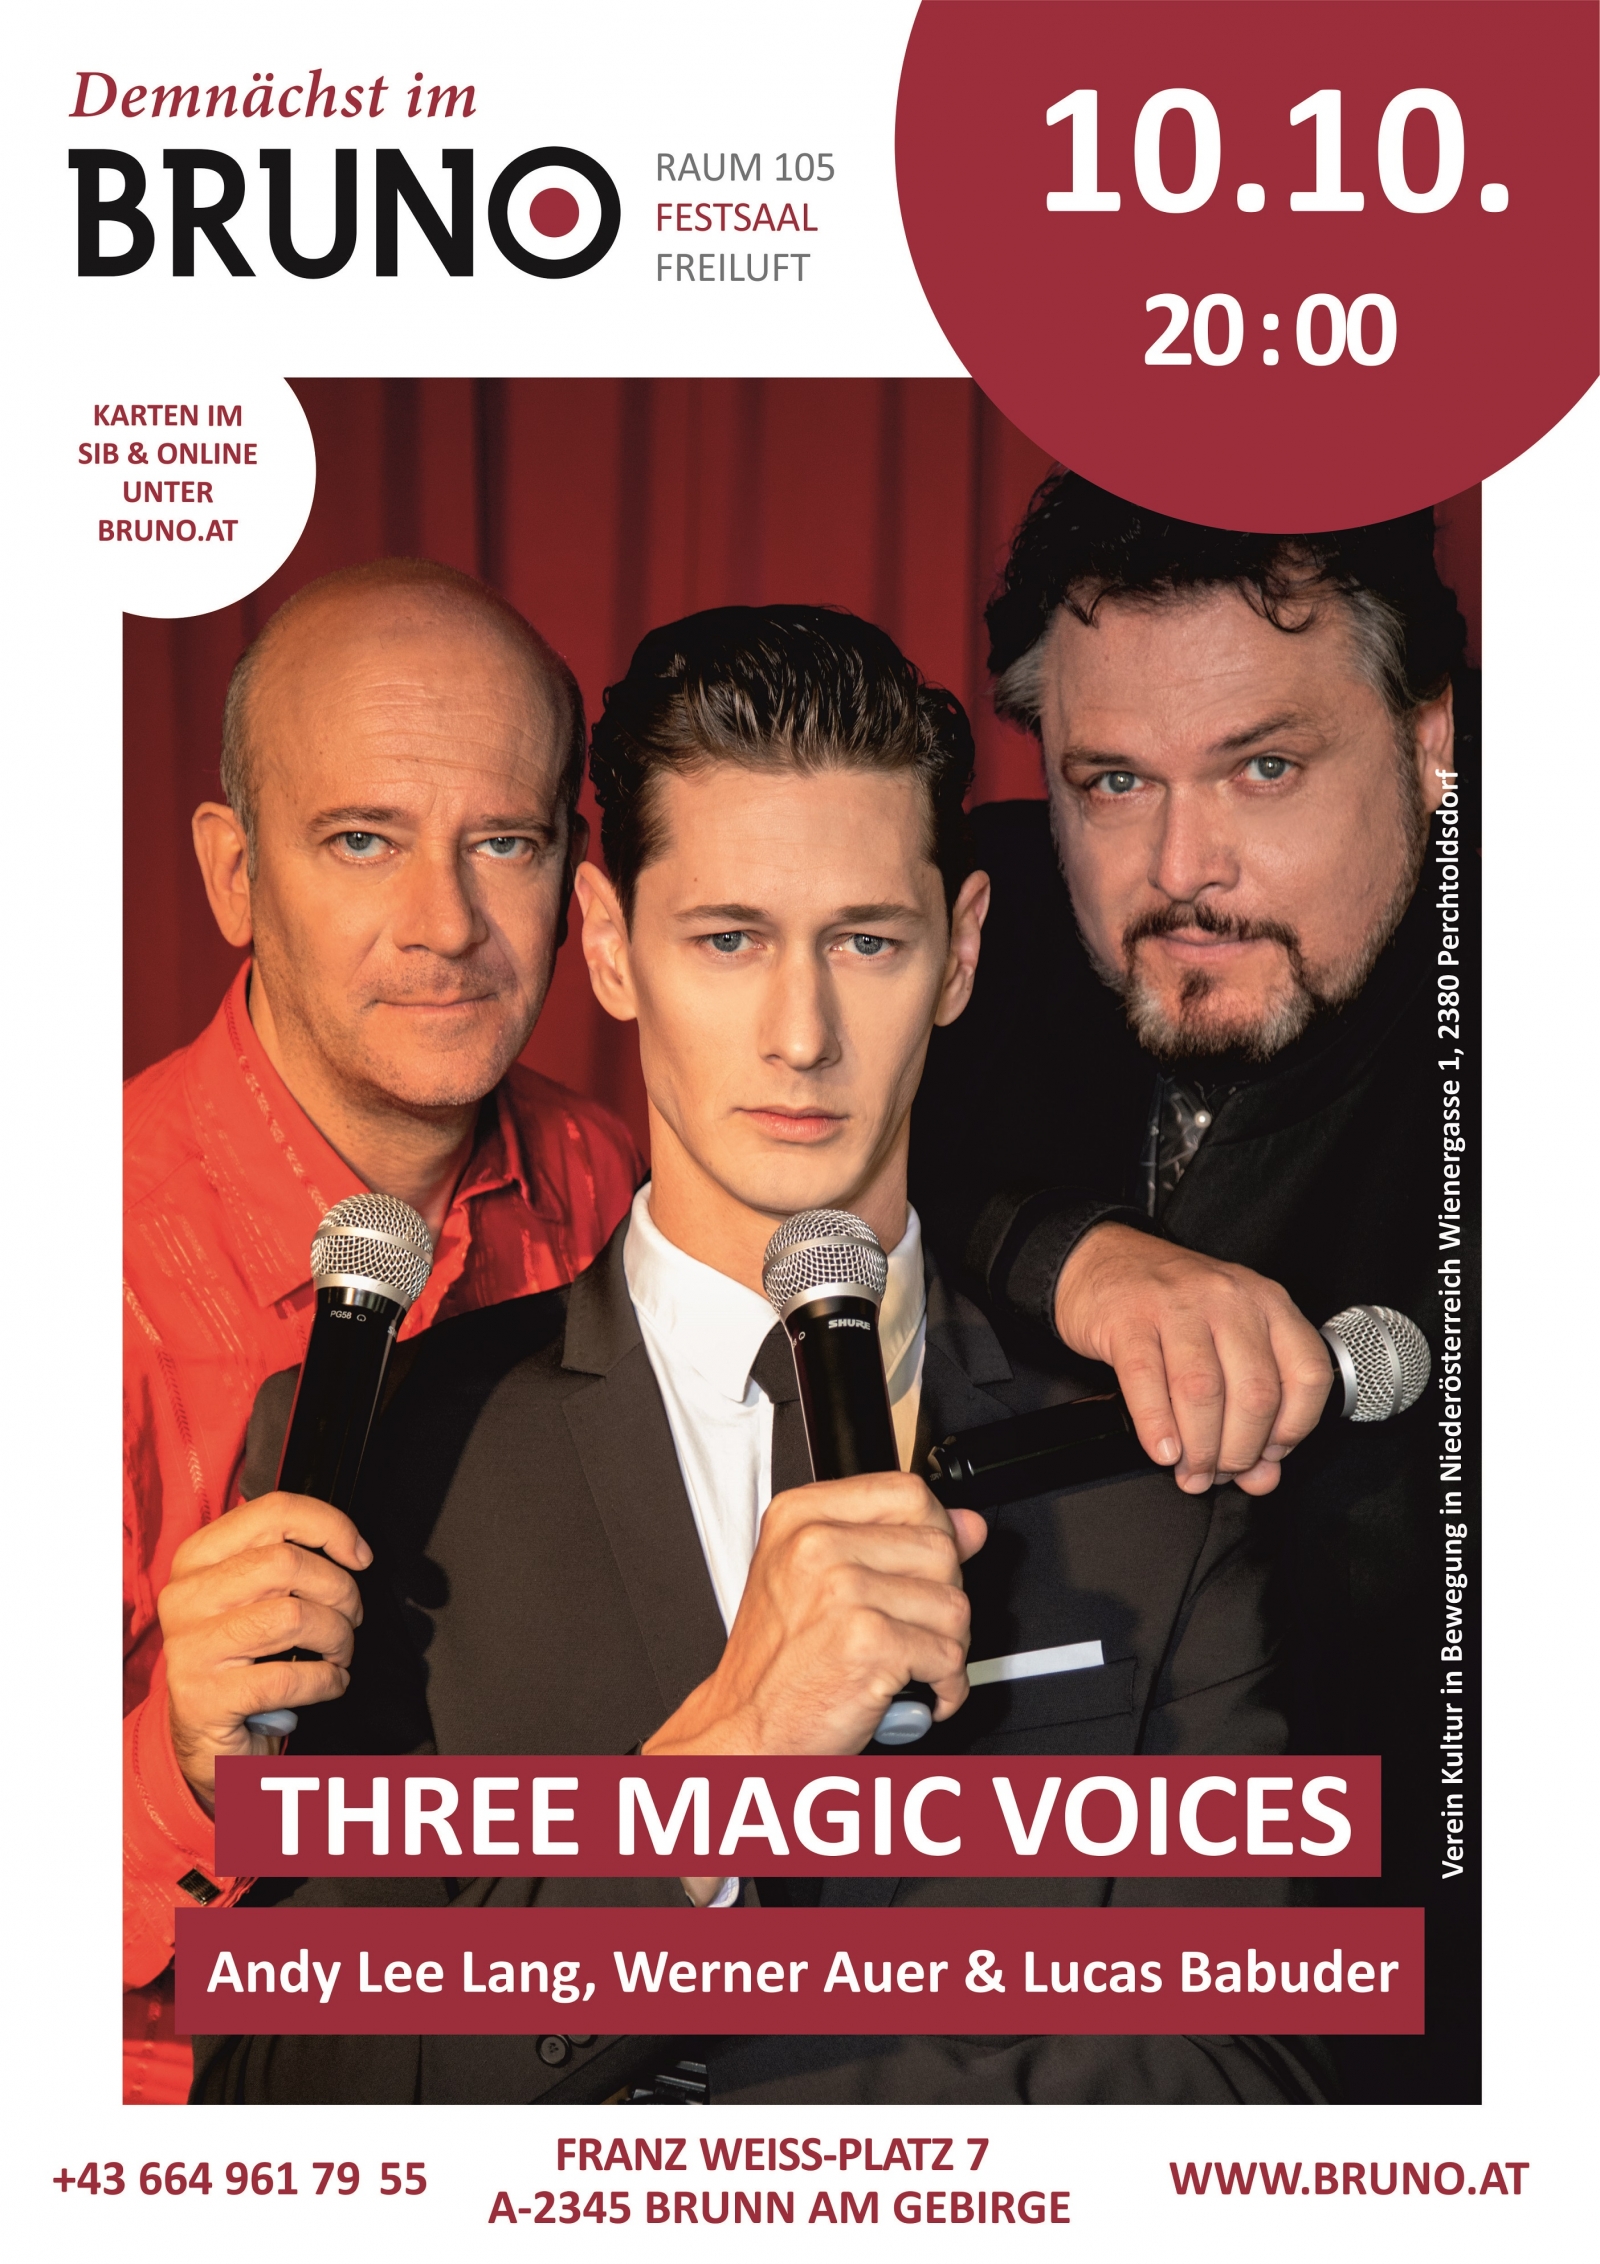 Three Magic Voices - Andy Lee Lang, Werner Auer & Lucas Babuder